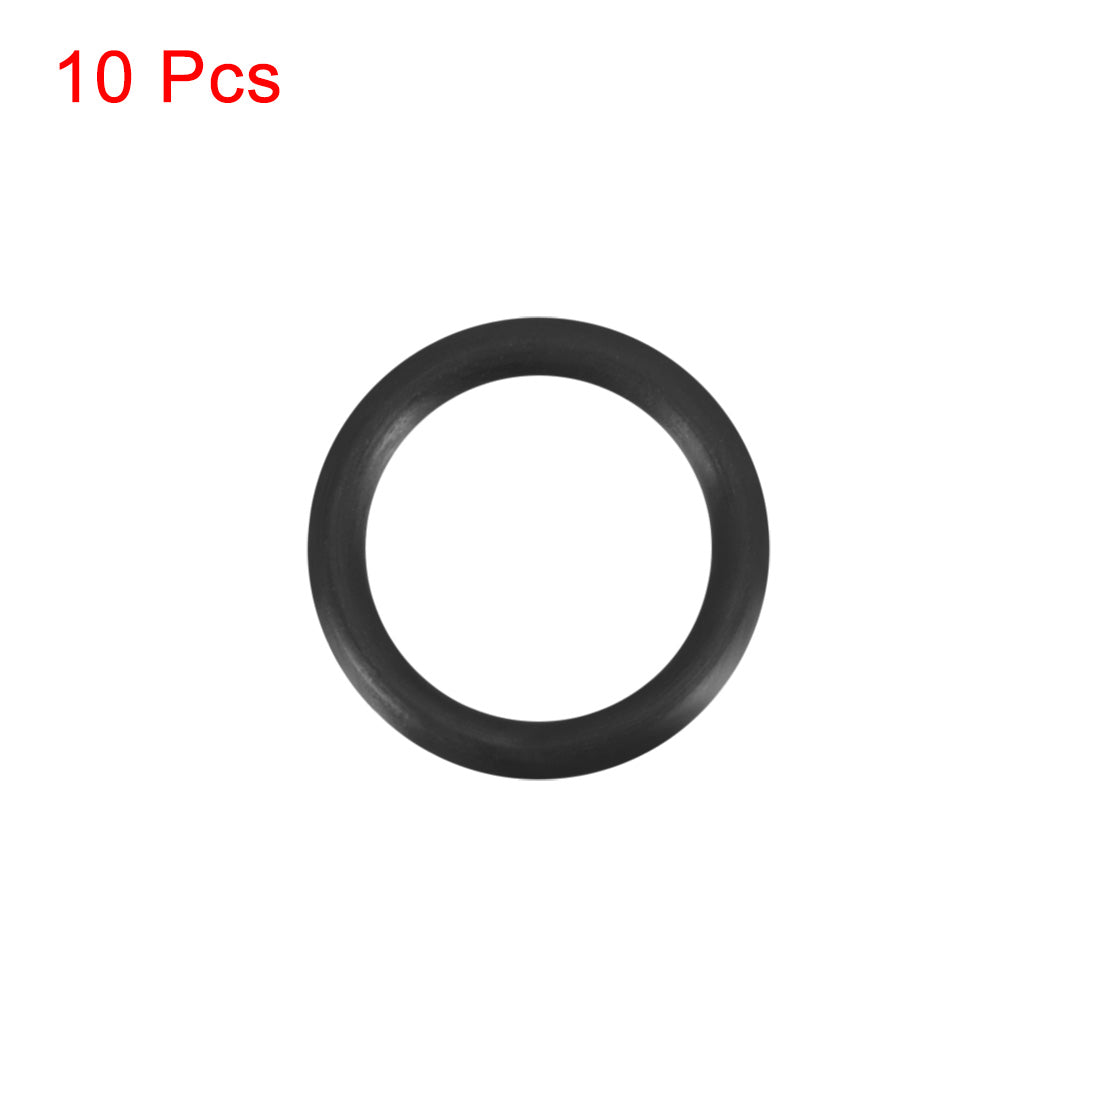 uxcell Uxcell O-Rings Nitrile Rubber 14mm x 18mm x 2mm Seal Rings Sealing Gasket 10pcs